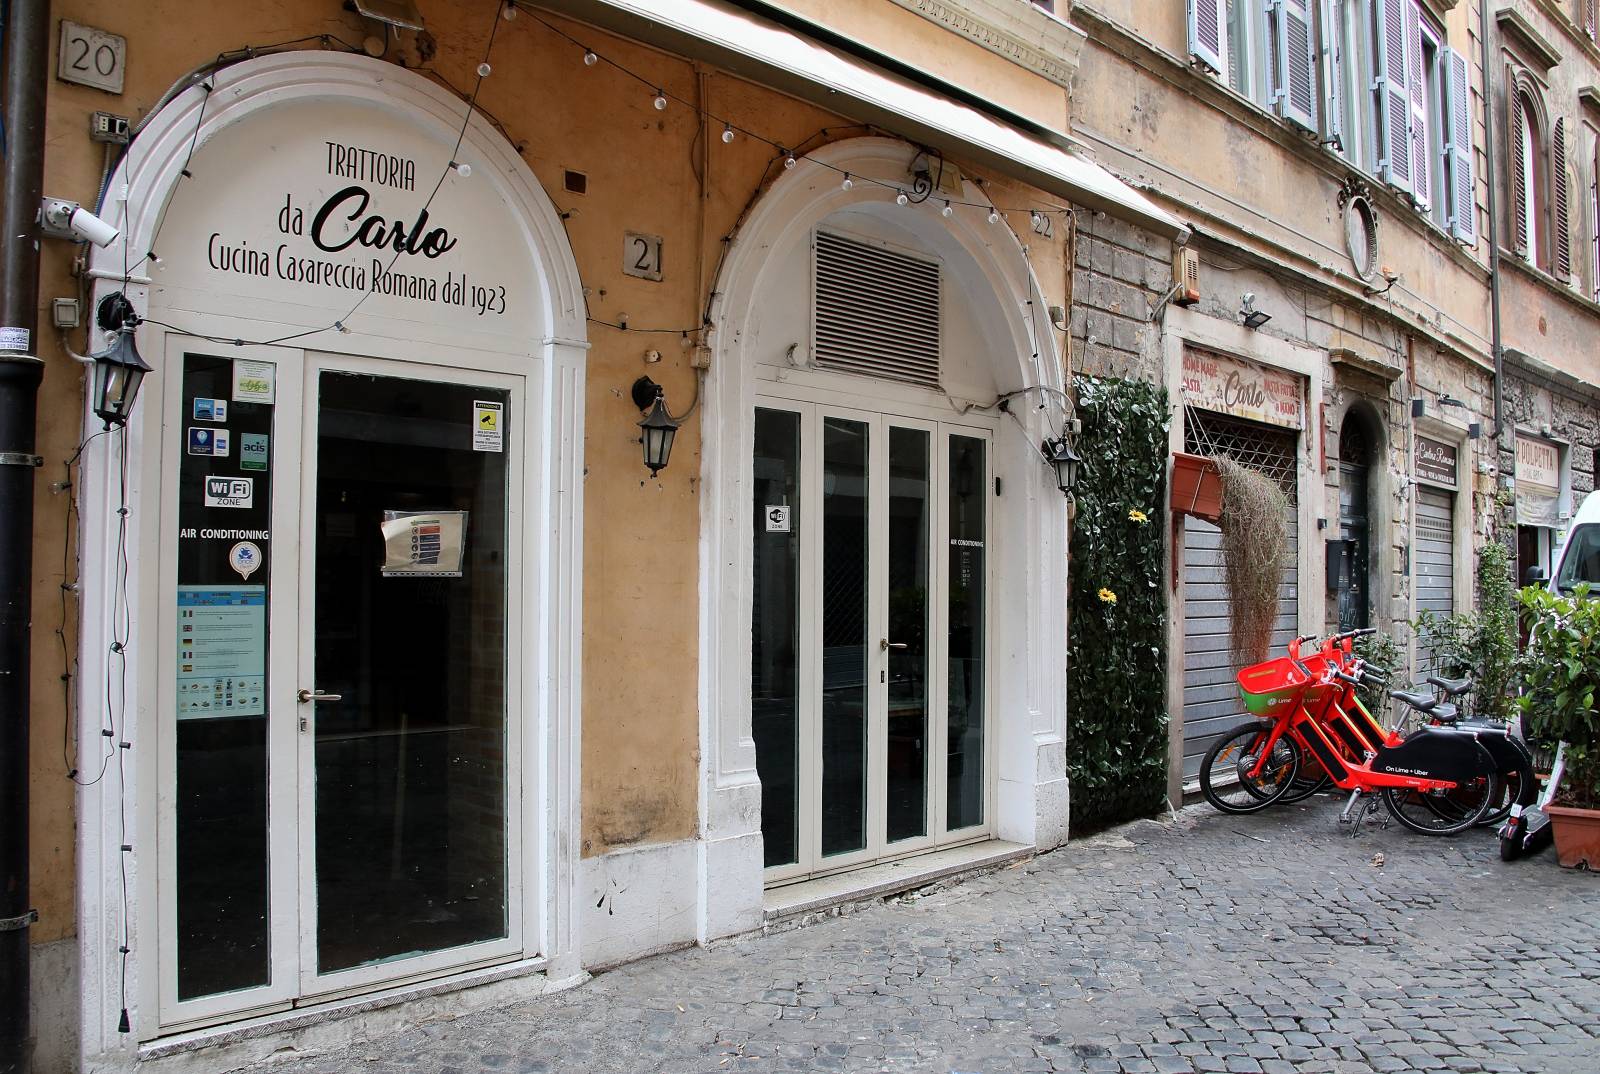 Rome, shops closed due to new restrictions against Covid 19